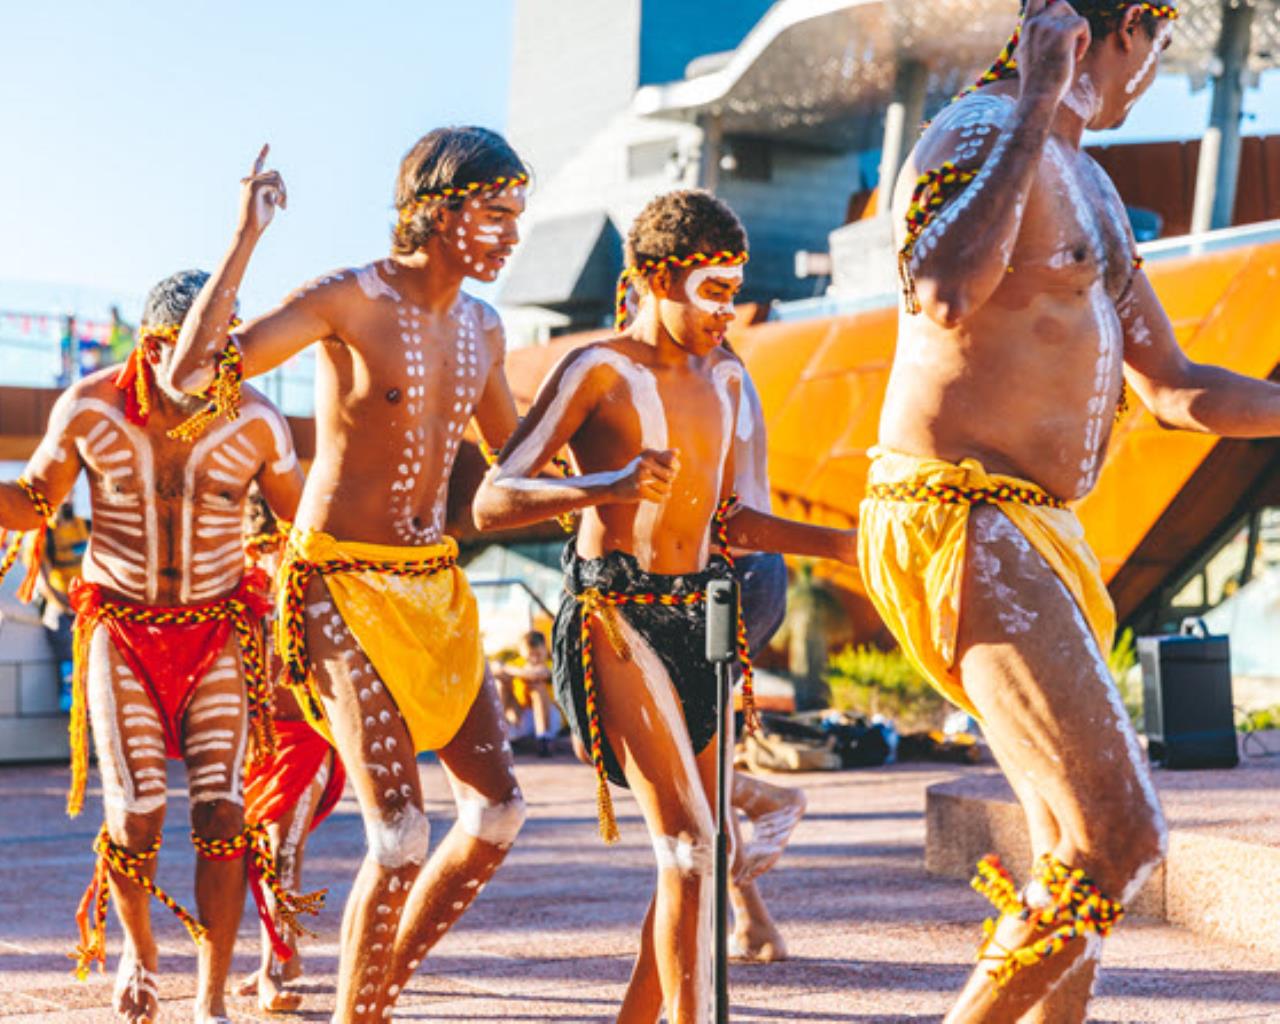 Aboriginal children and adults dance wearing coloured outfits